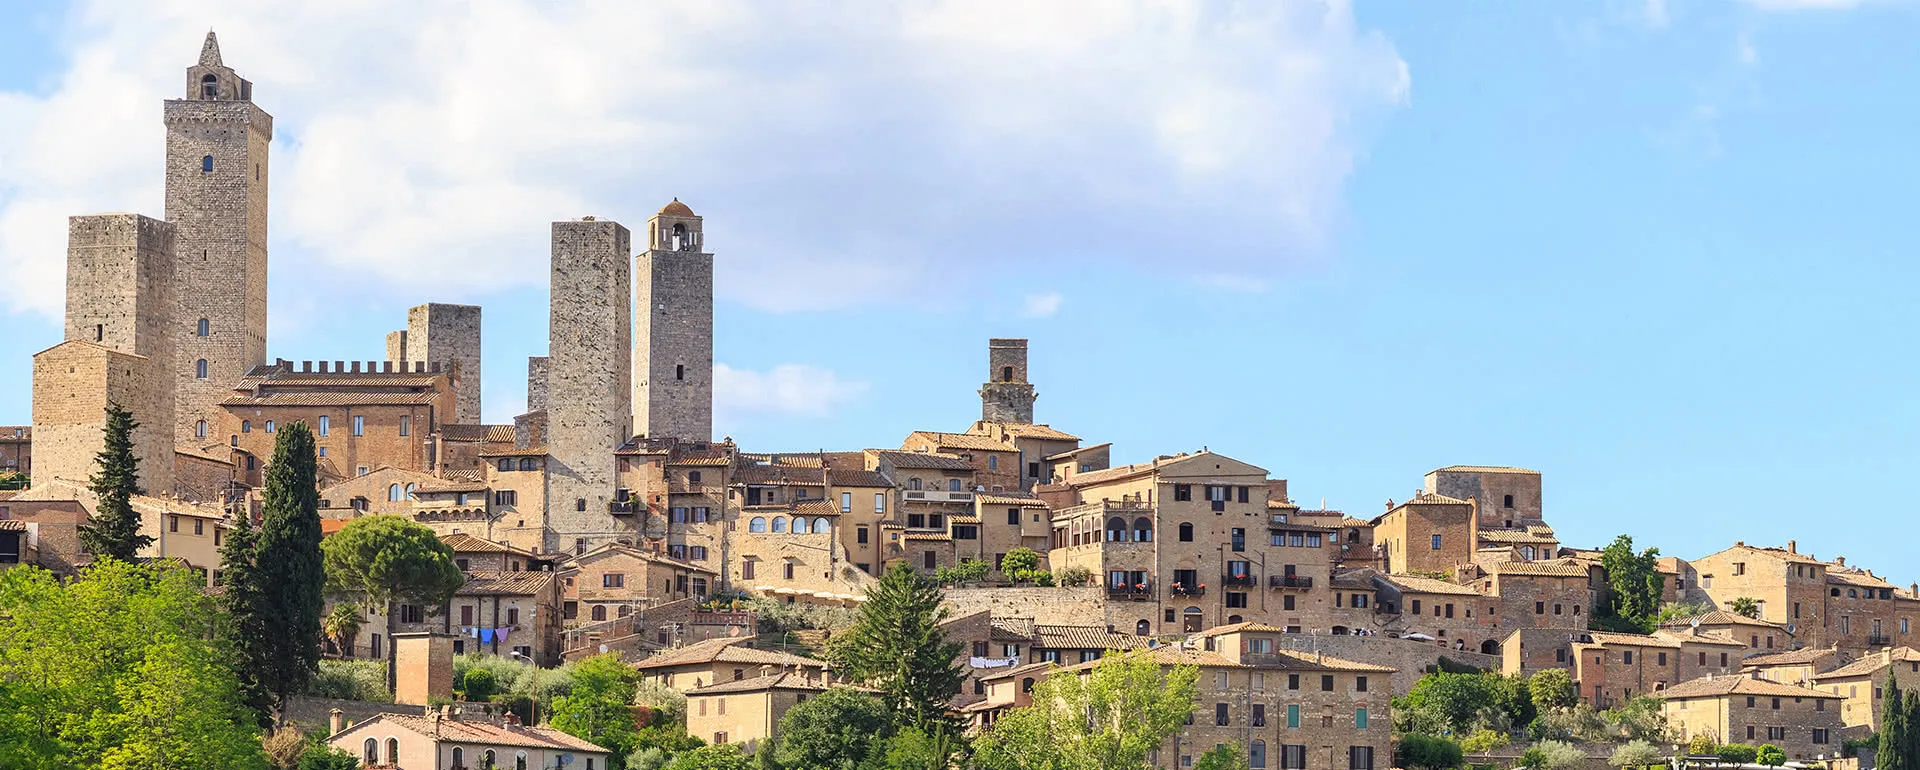 San Gimignano - the destination with youth hostels